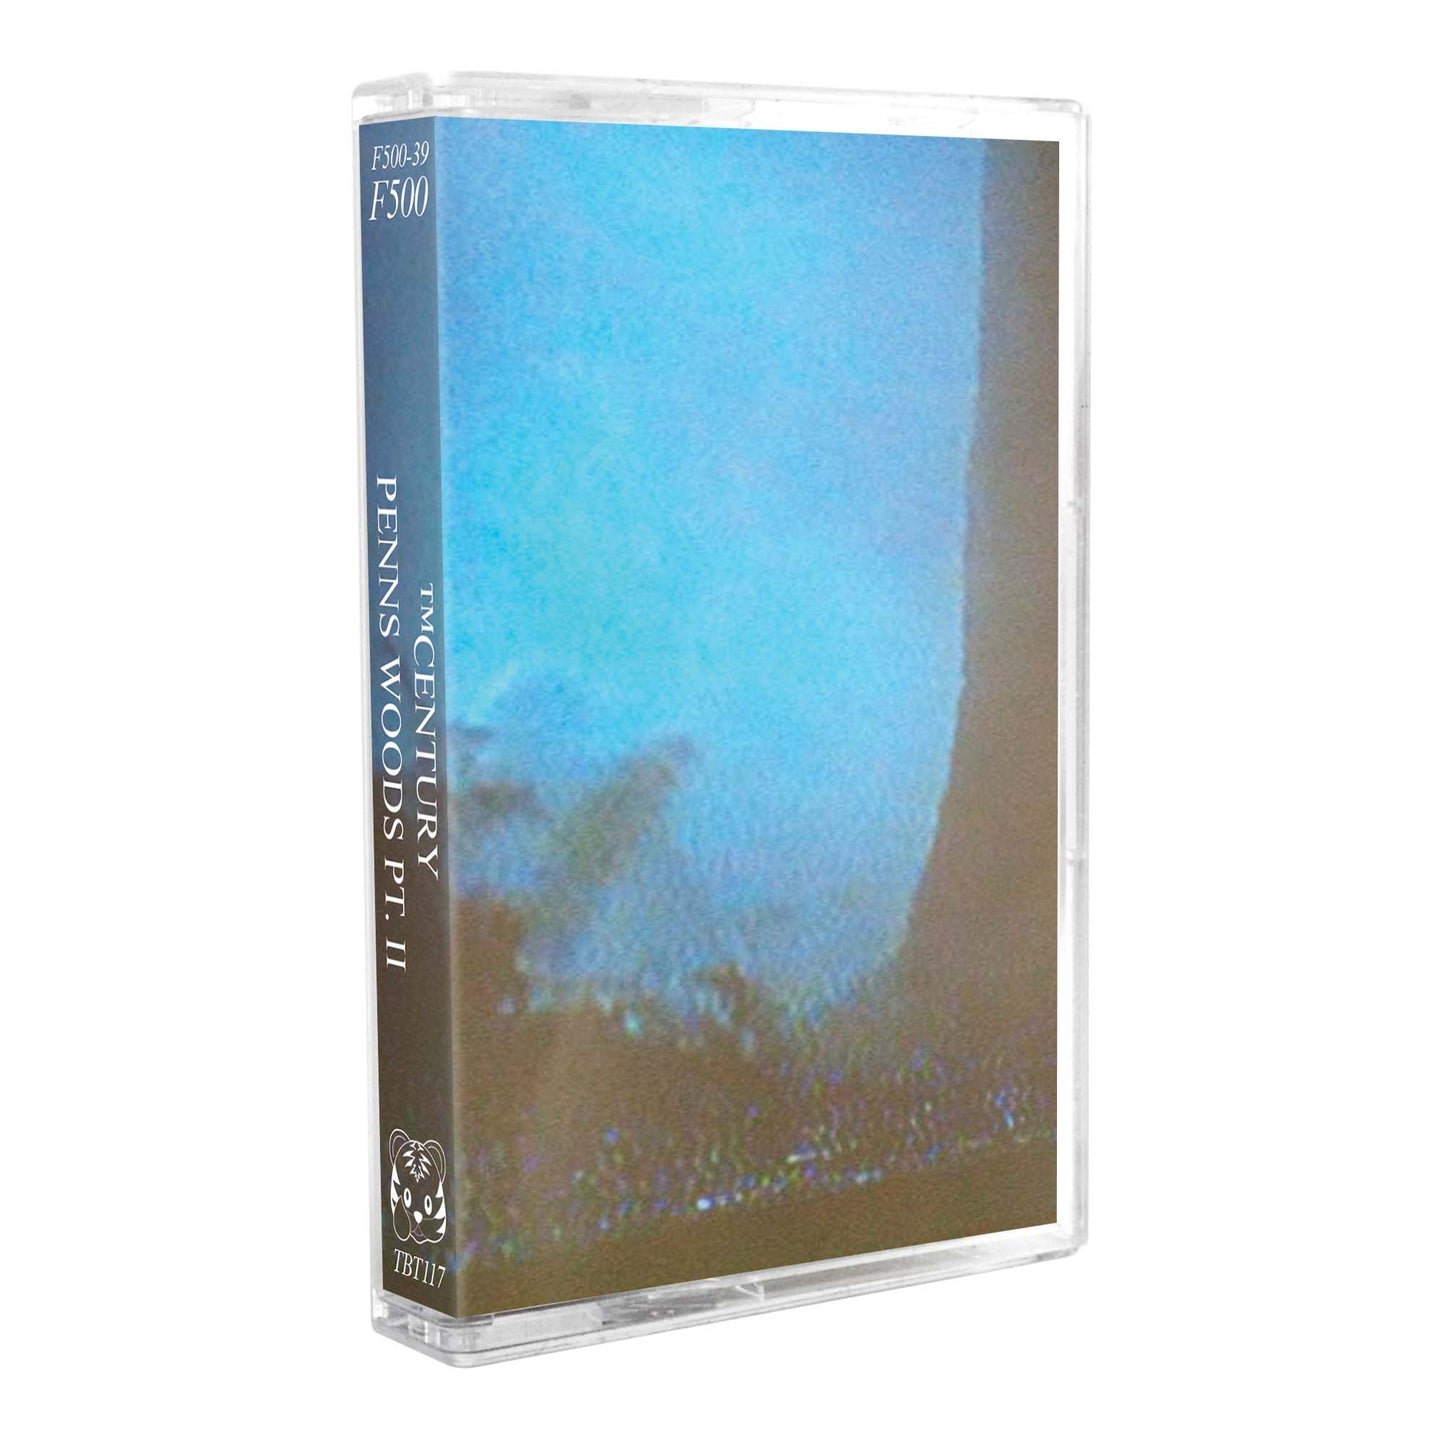 ™CENTURY - "PENNS WOODS PT. II" Limited Edition Cassette Tape